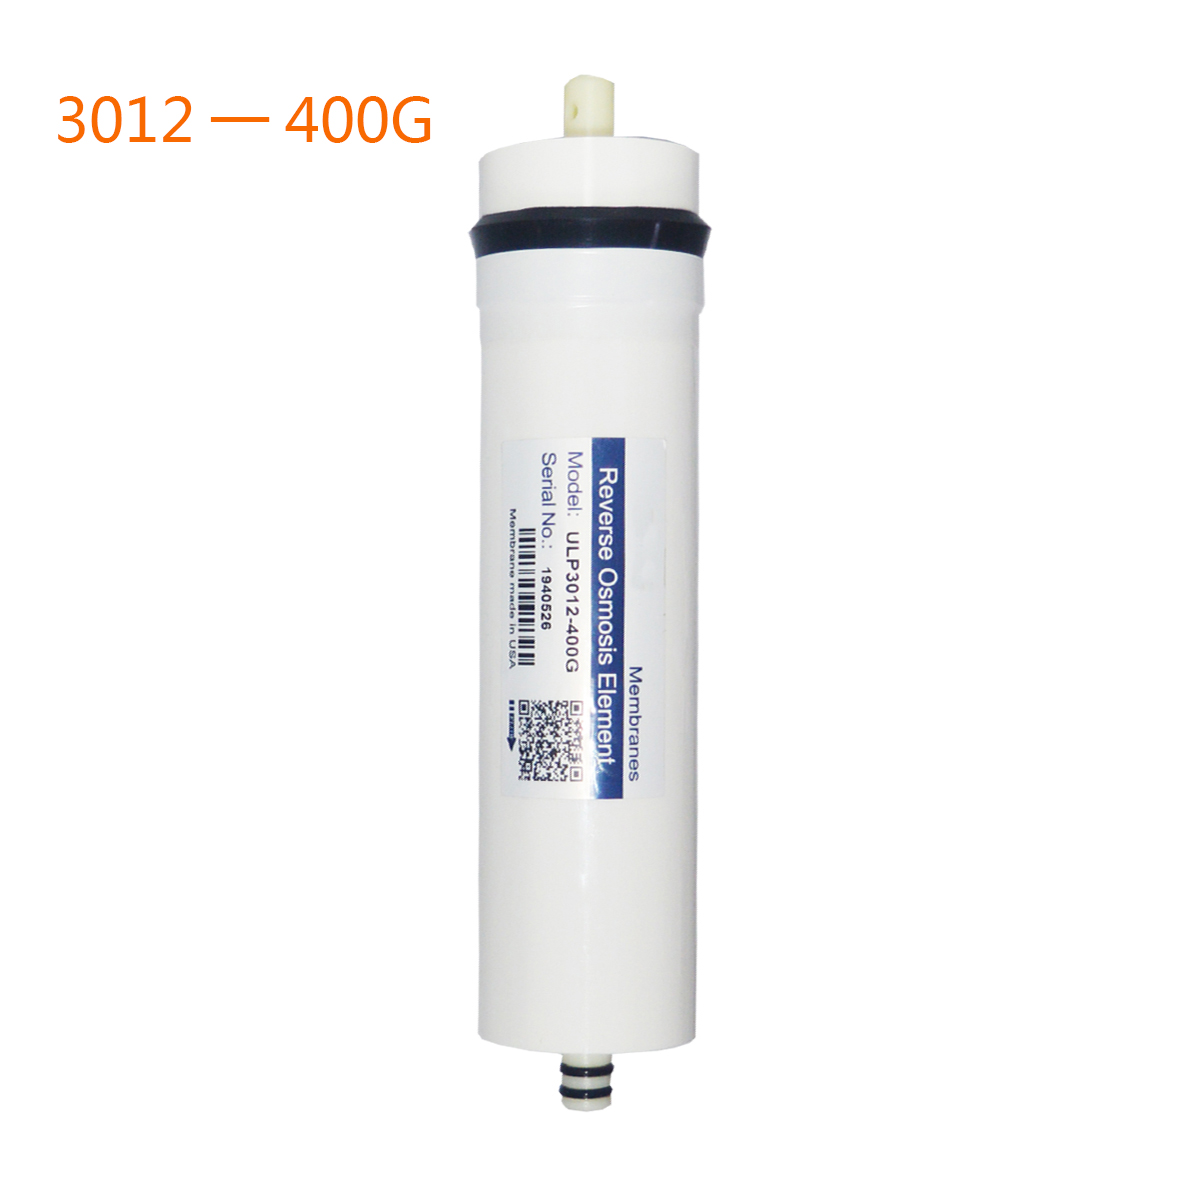 Reverse-Osmosis-Membrane-Replacement-RO-Water-System-Filter-5075100125150400G-1425879-5